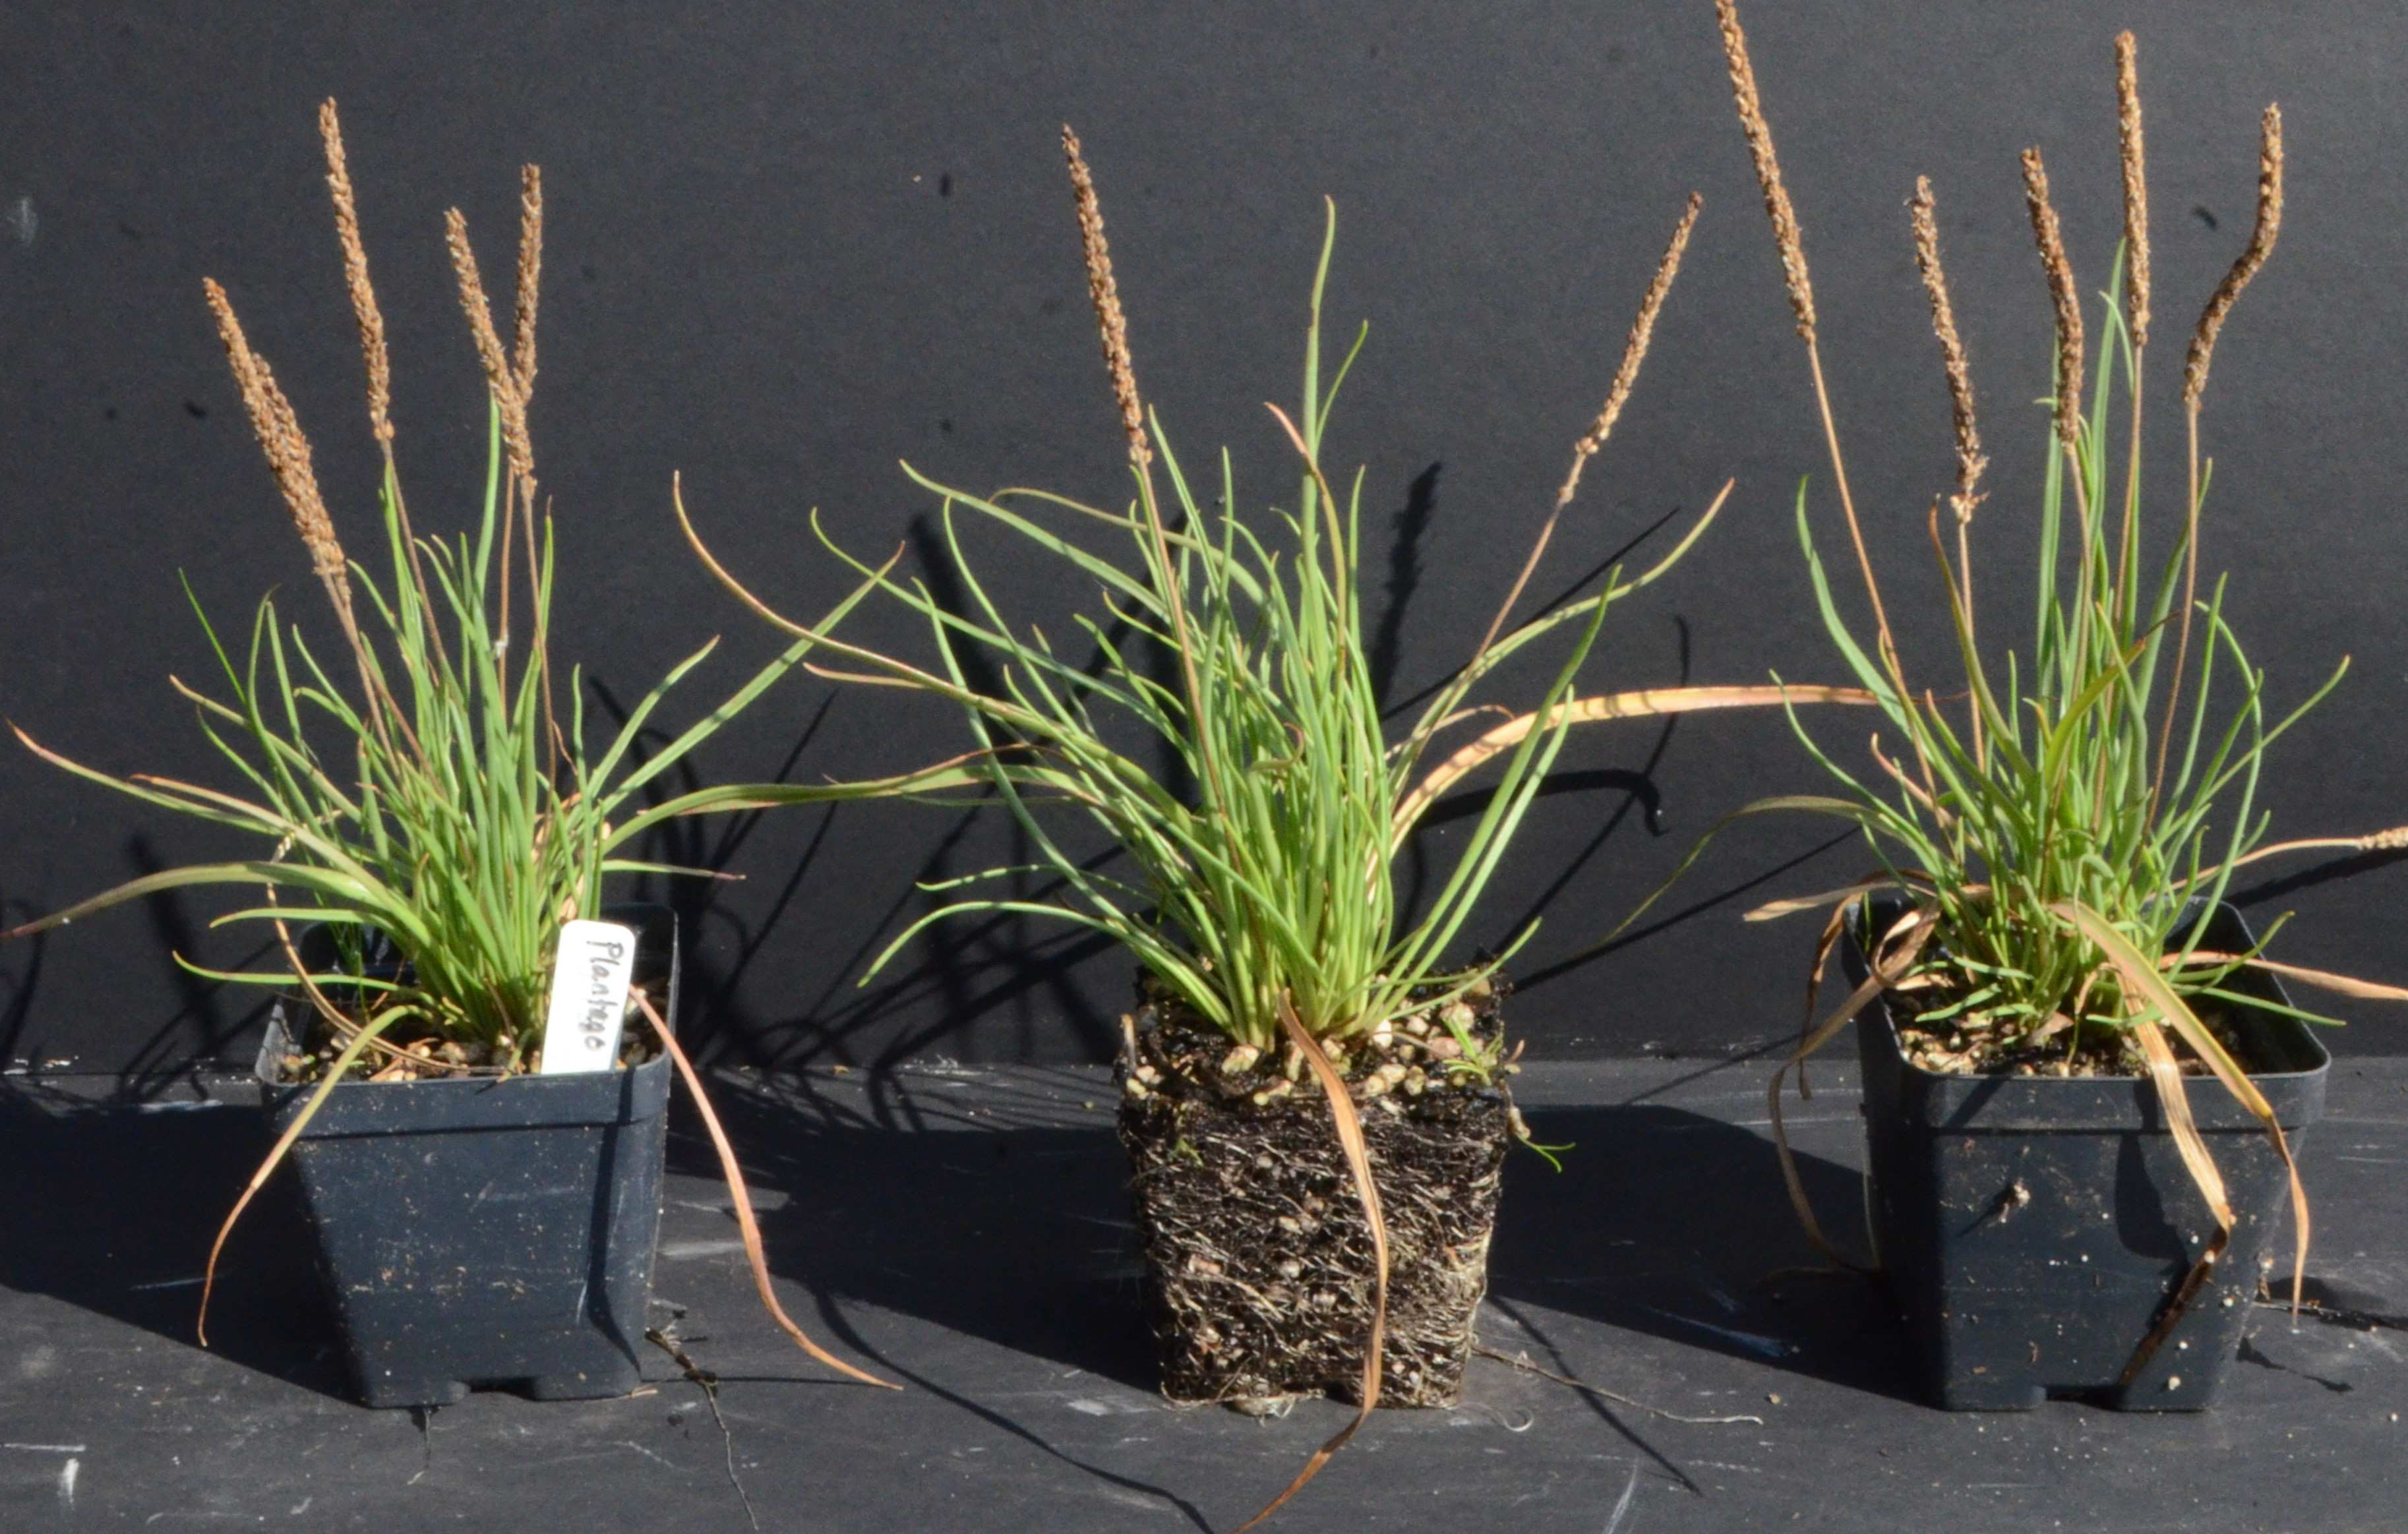 Plantago maritima plants grown in 4-inch containers at the Berry Seed Bank research nursery located in Portland, Oregon.